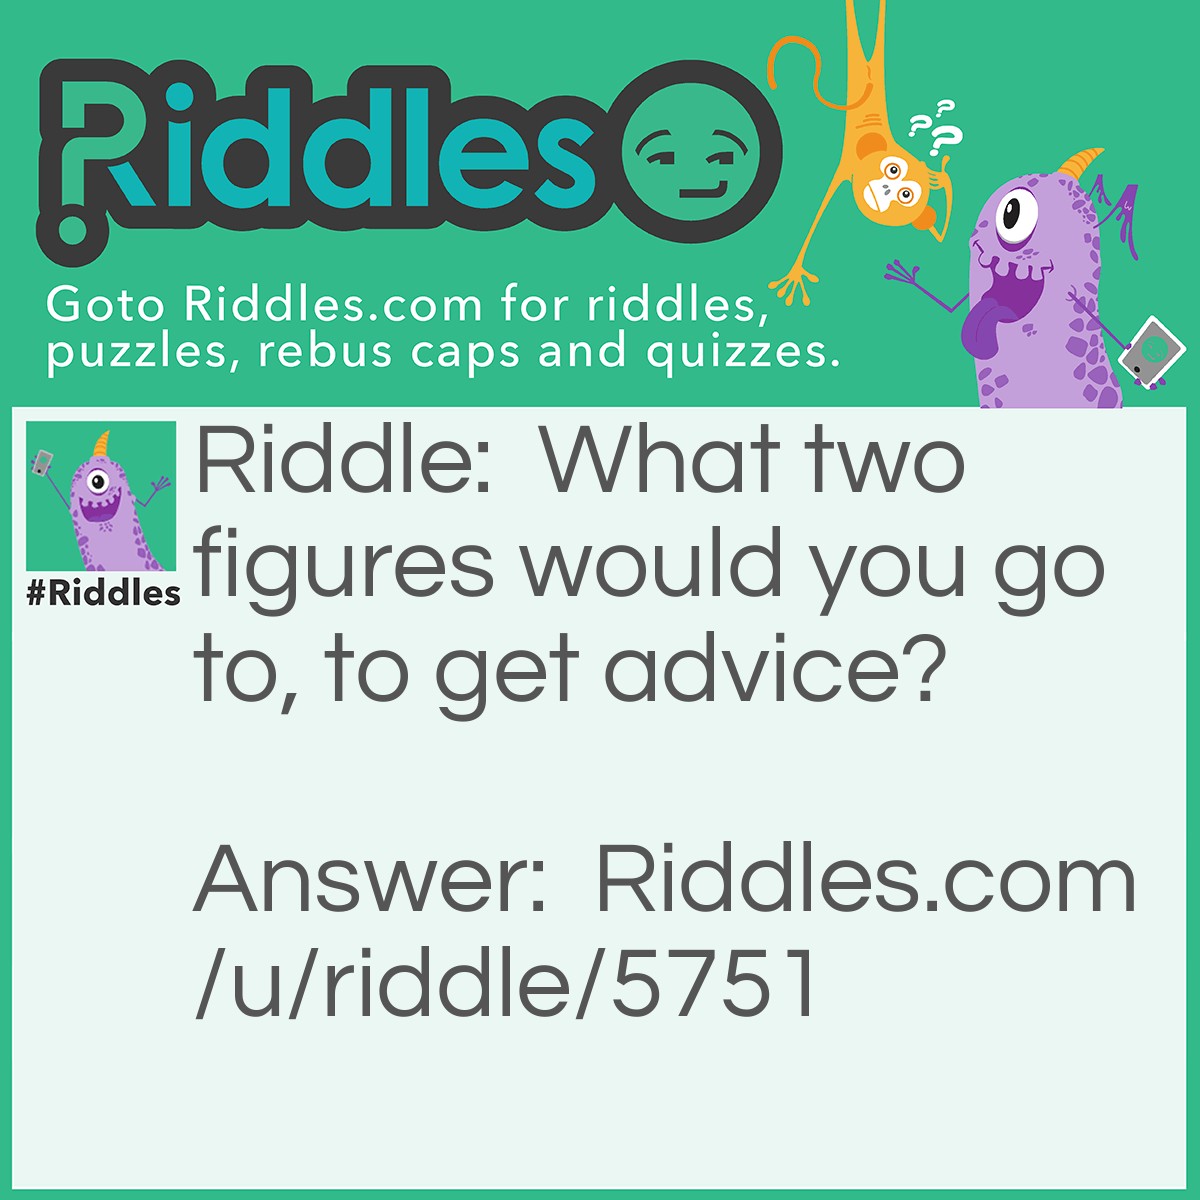 Riddle: What two figures would you go to, to get advice? Answer: The FATHER figure and the MOTHER figure.